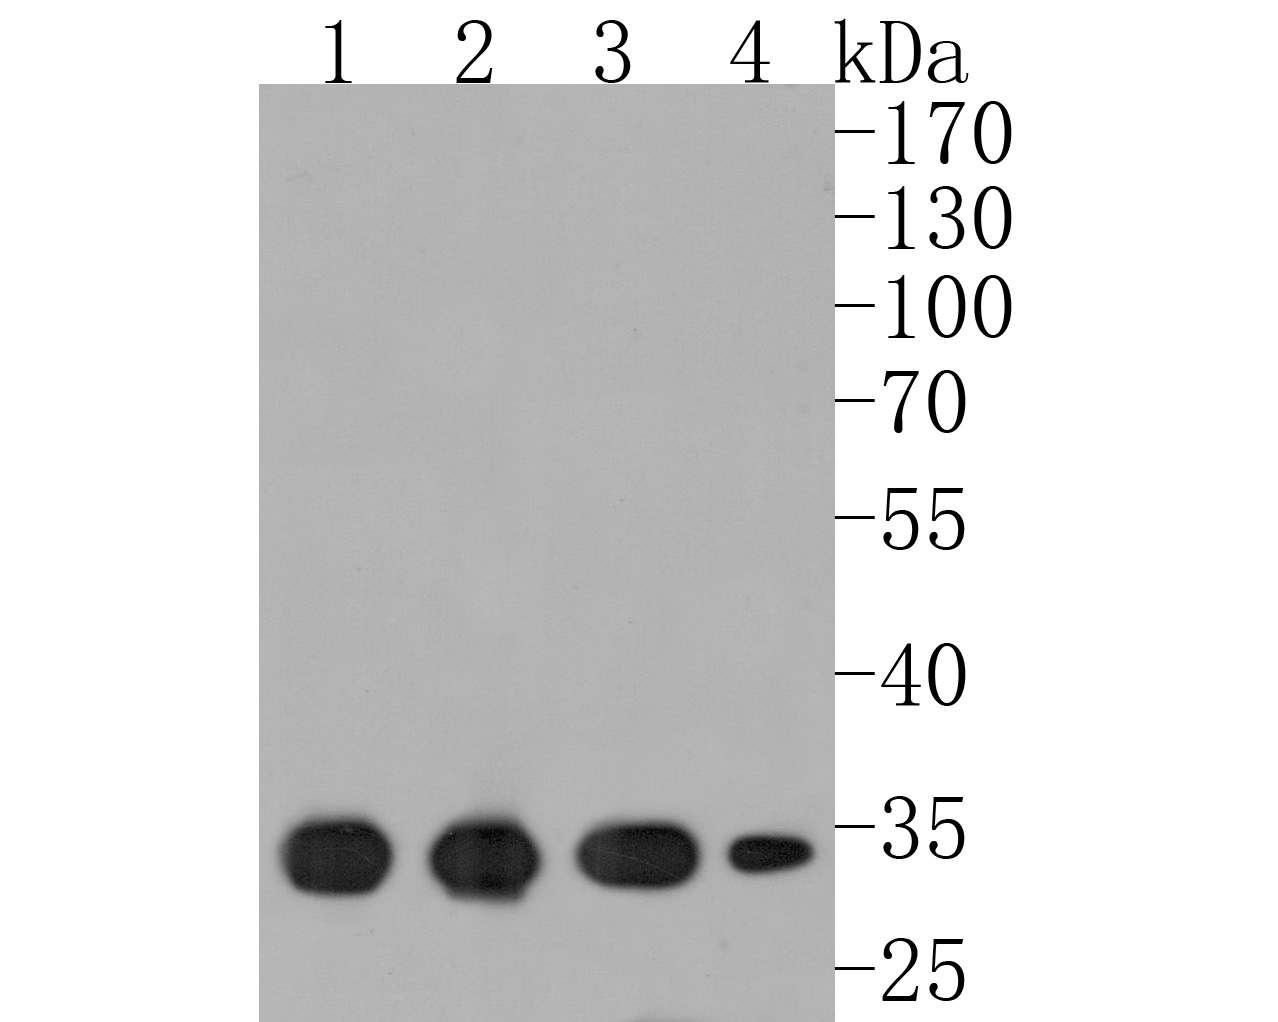 Western blot analysis of ARPC2 on different lysates. Proteins were transferred to a PVDF membrane and blocked with 5% BSA in PBS for 1 hour at room temperature. The primary antibody (HA720030, 1/500) was used in 5% BSA at room temperature for 2 hours. Goat Anti-Rabbit IgG - HRP Secondary Antibody (HA1001) at 1:200,000 dilution was used for 1 hour at room temperature.<br />
Positive control: <br />
Lane 1: THP-1 cell lysate<br />
Lane 2: Jurkat cell lysate<br />
Lane 3: Mouse lung tissue lysate<br />
Lane 4: Mouse kidney tissue lysate